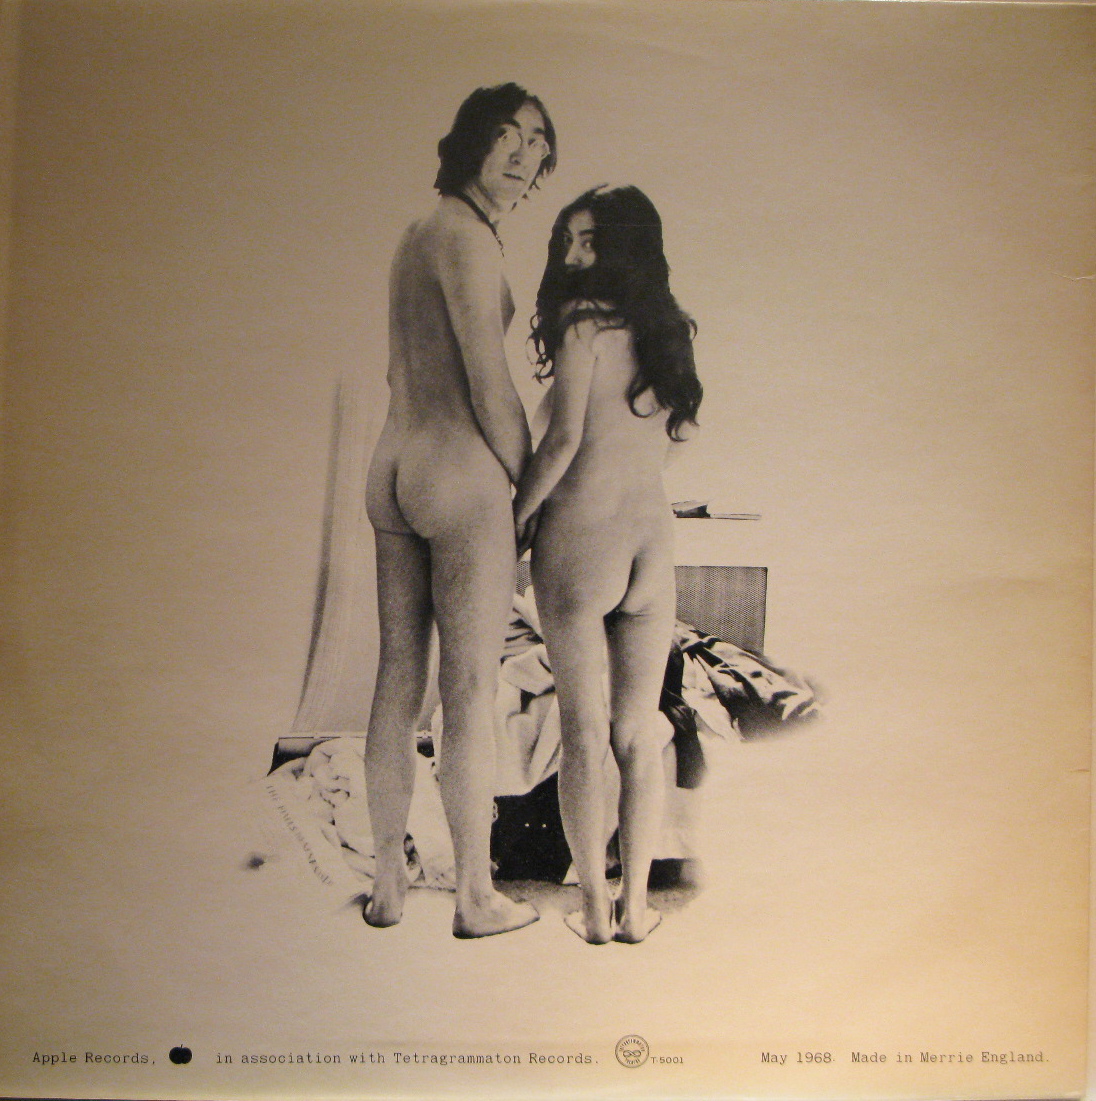 Unfinished Music No. 1: Two Virgins" John and Yoko Apple Records 1968....